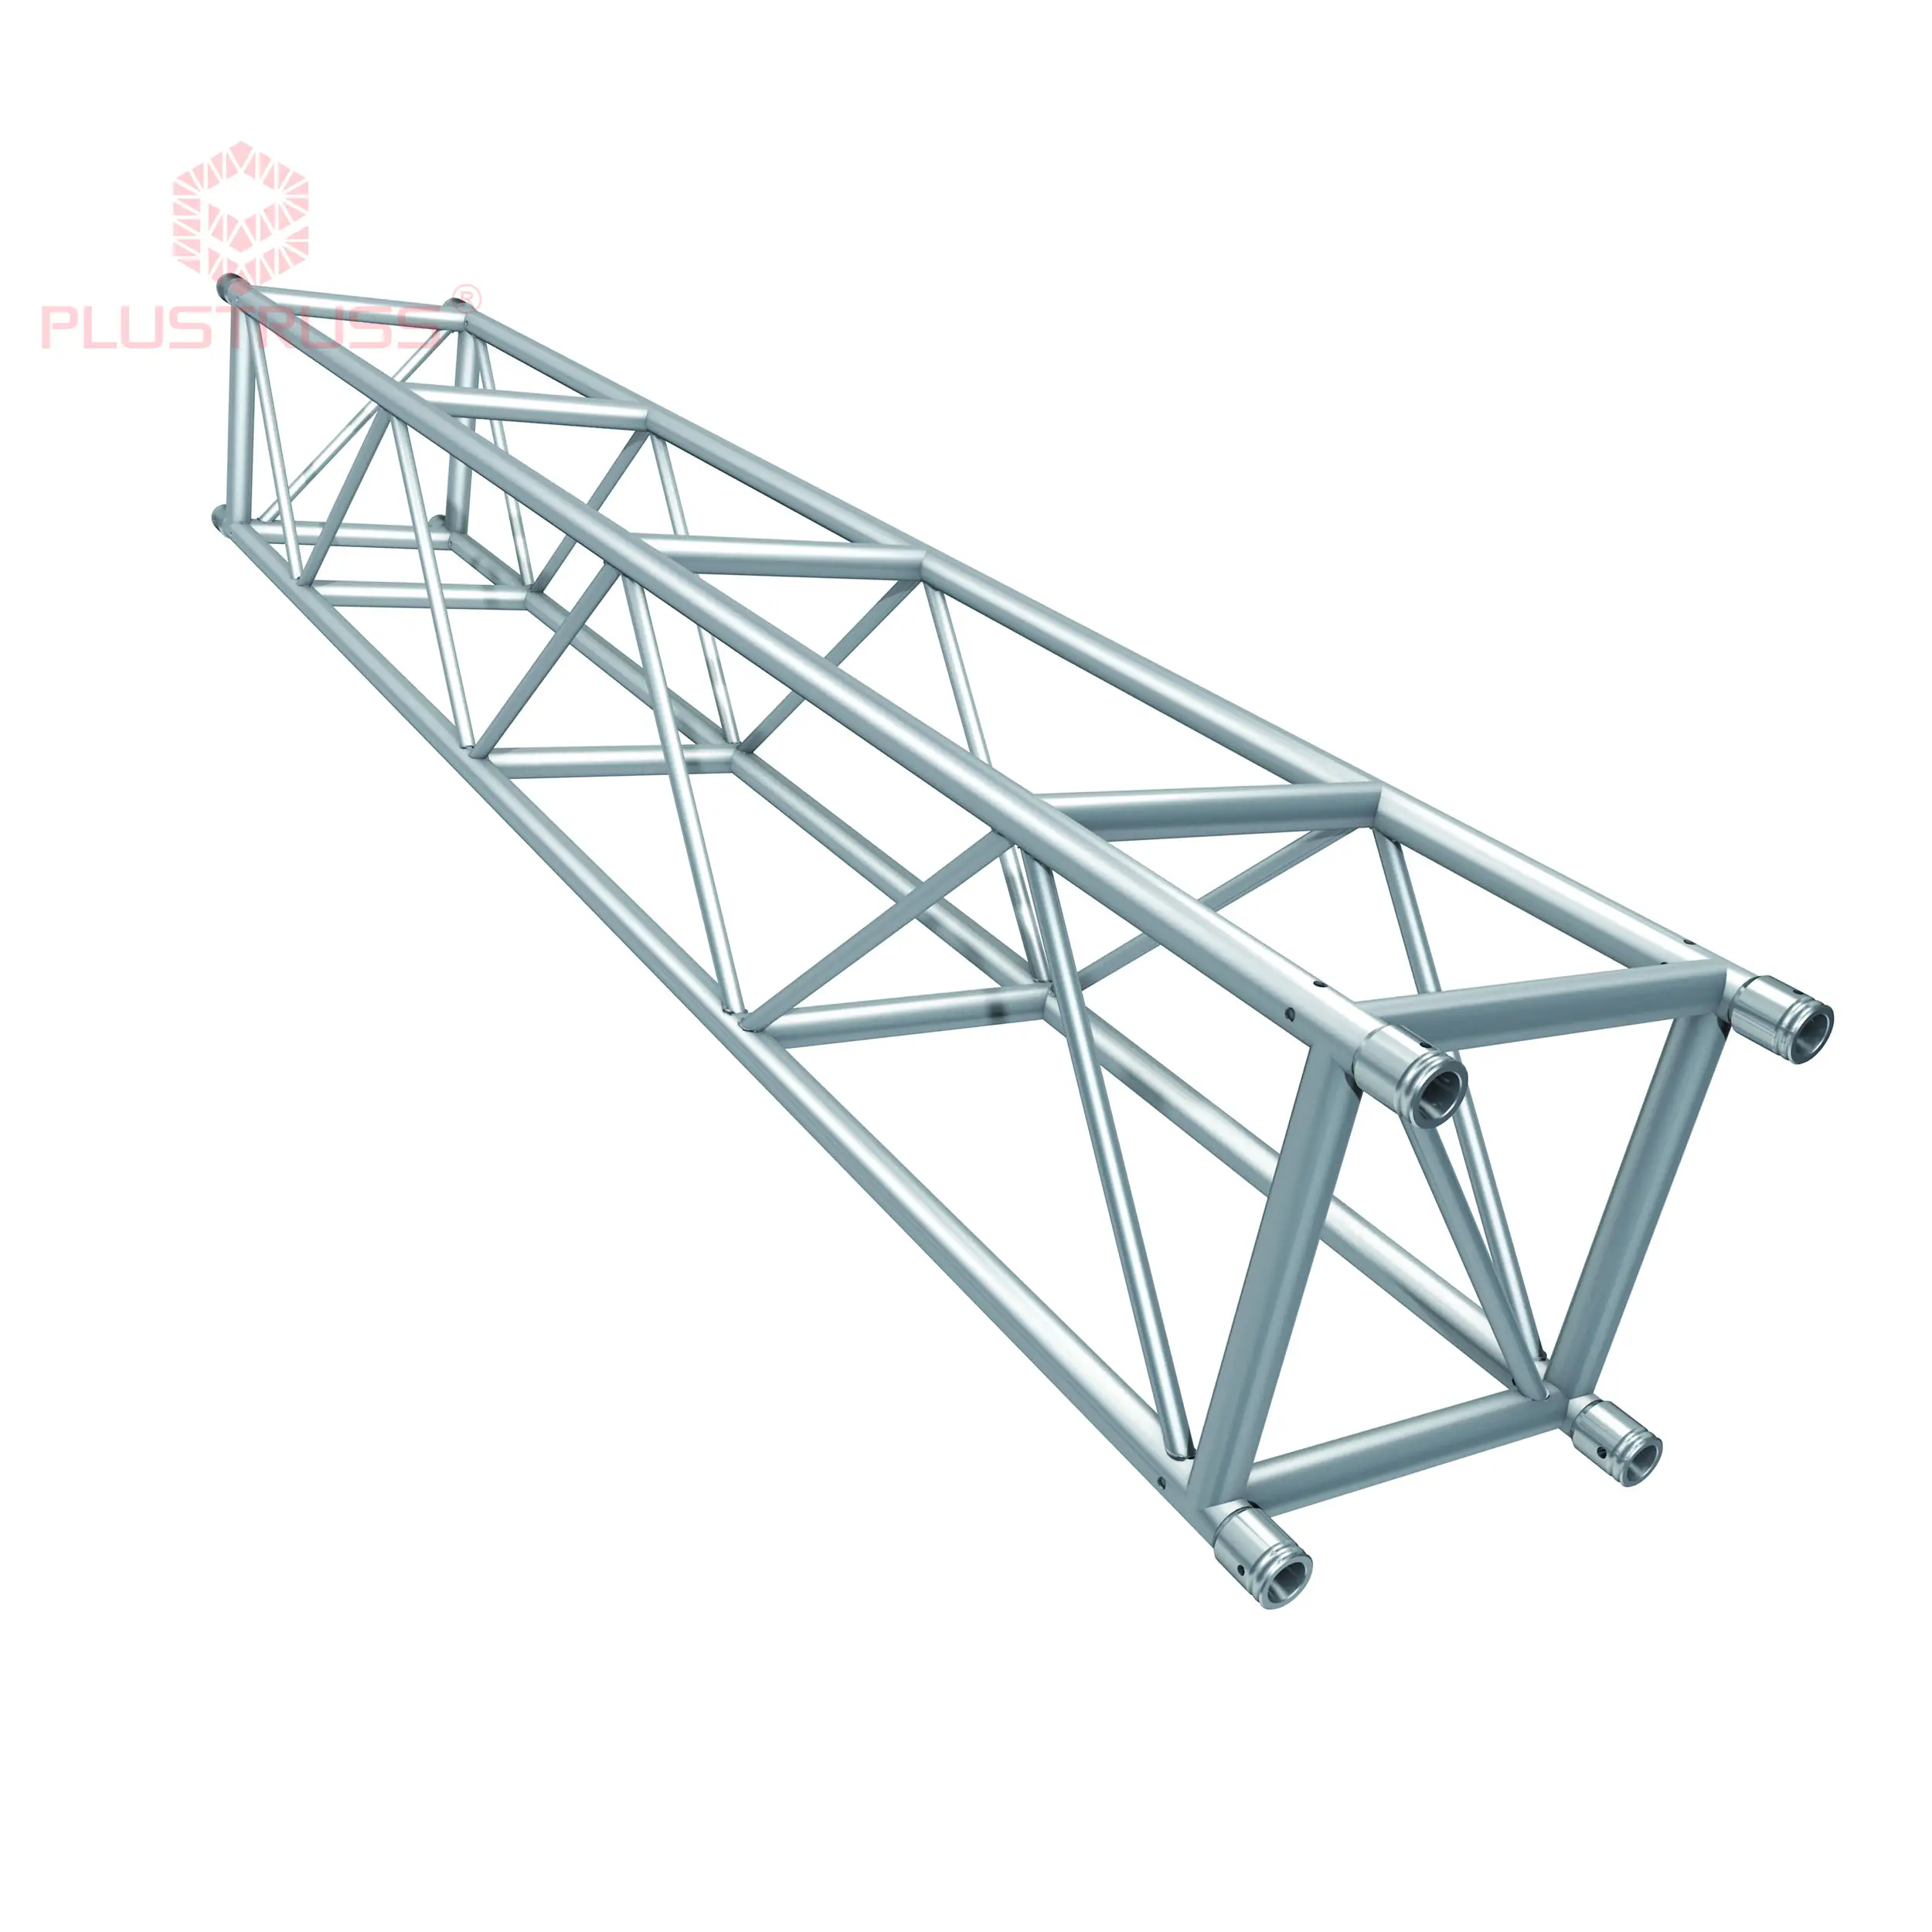 Heavy Duty Aluminum Truss Display Stage Lighting Truss System Structures Spare Parts 530MM x530MM 3.5M G54